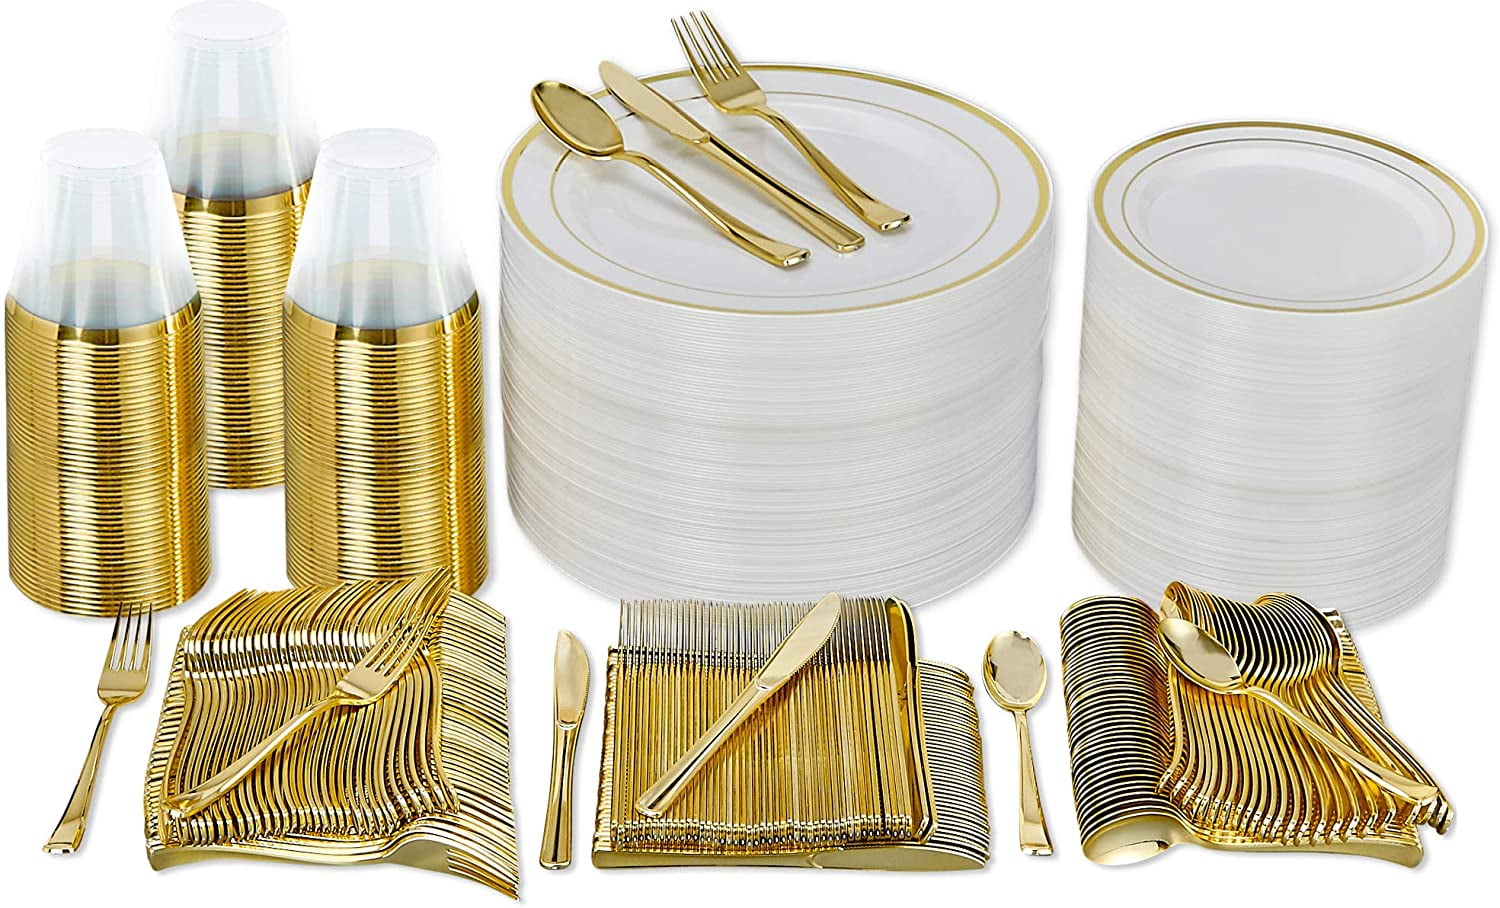 Reusable Plastic Catering Tableware Party Wedding Rectangular Plate Gold 6 Pack 